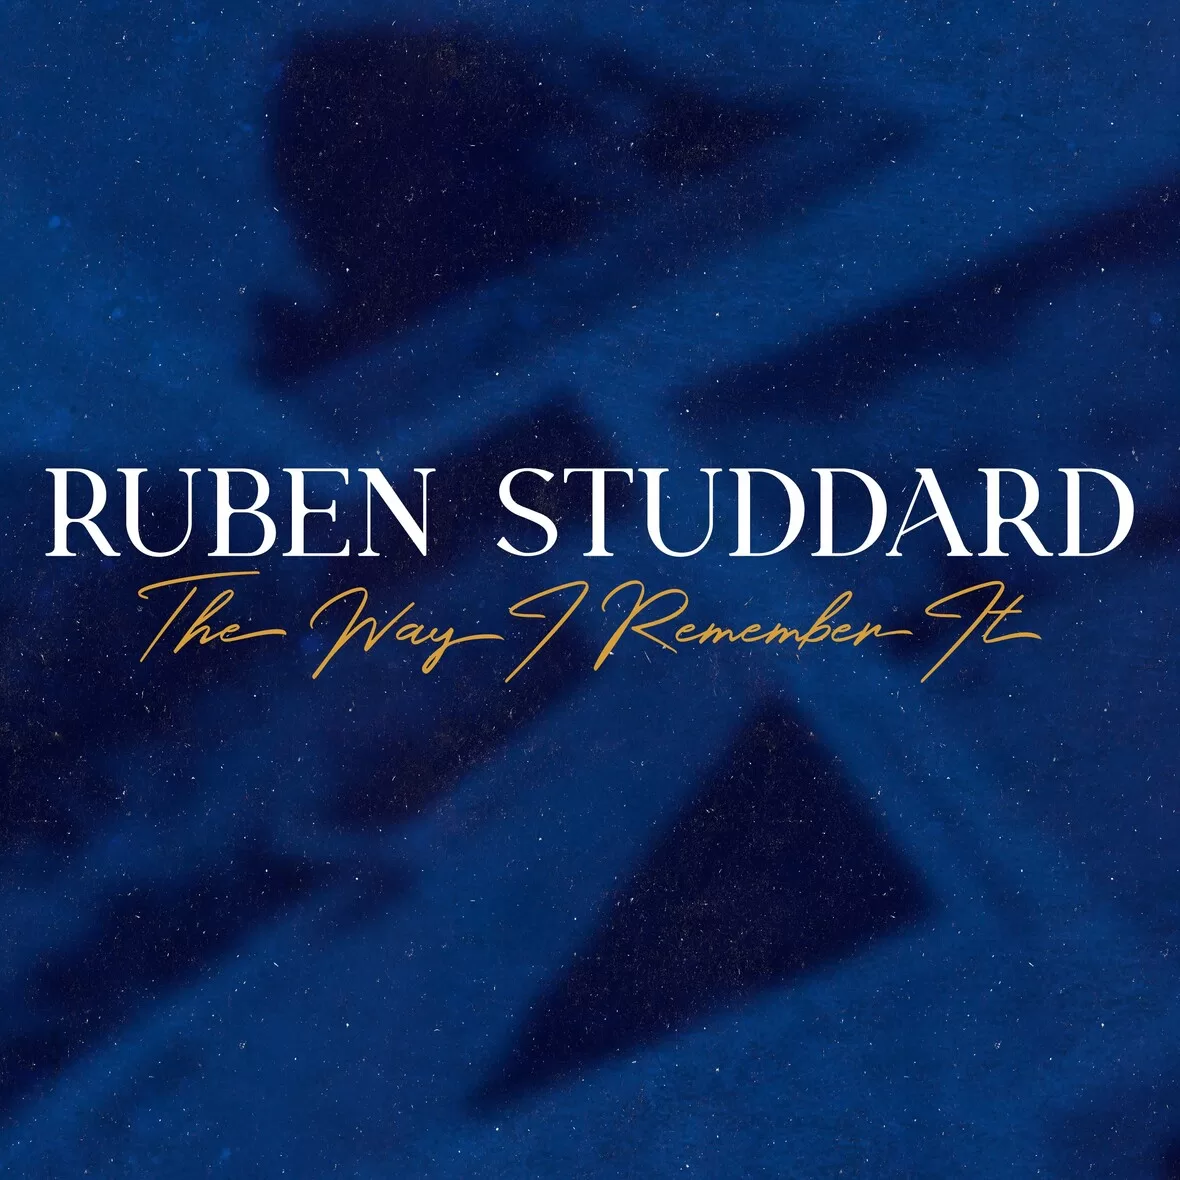 Ruben Studdard Releases New Single “The Way I Remember It”